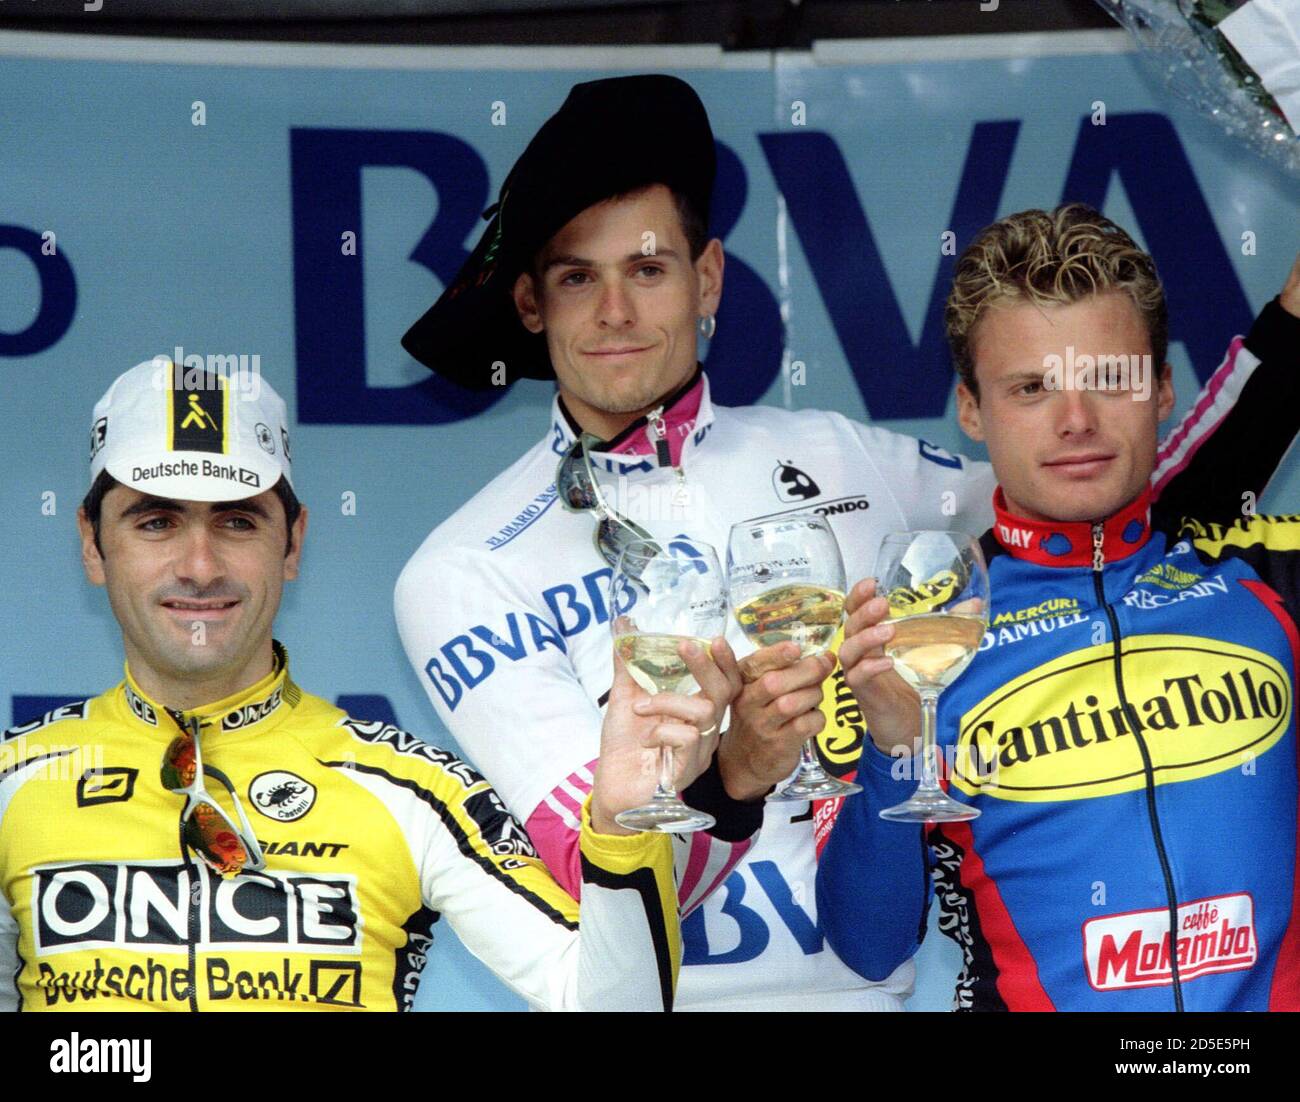 winners-of-the-tour-of-the-basque-country-cycling-race-pose-at-the-podium-after-the-fifth-and-last-stage-april-7-winner-andreas-kloden-of-germany-c-is-flanked-by-runner-up-danilo-di-luca-of-italy-r-and-by-third-placed-laurent-jalabert-of-france-es-2D5E5PH.jpg